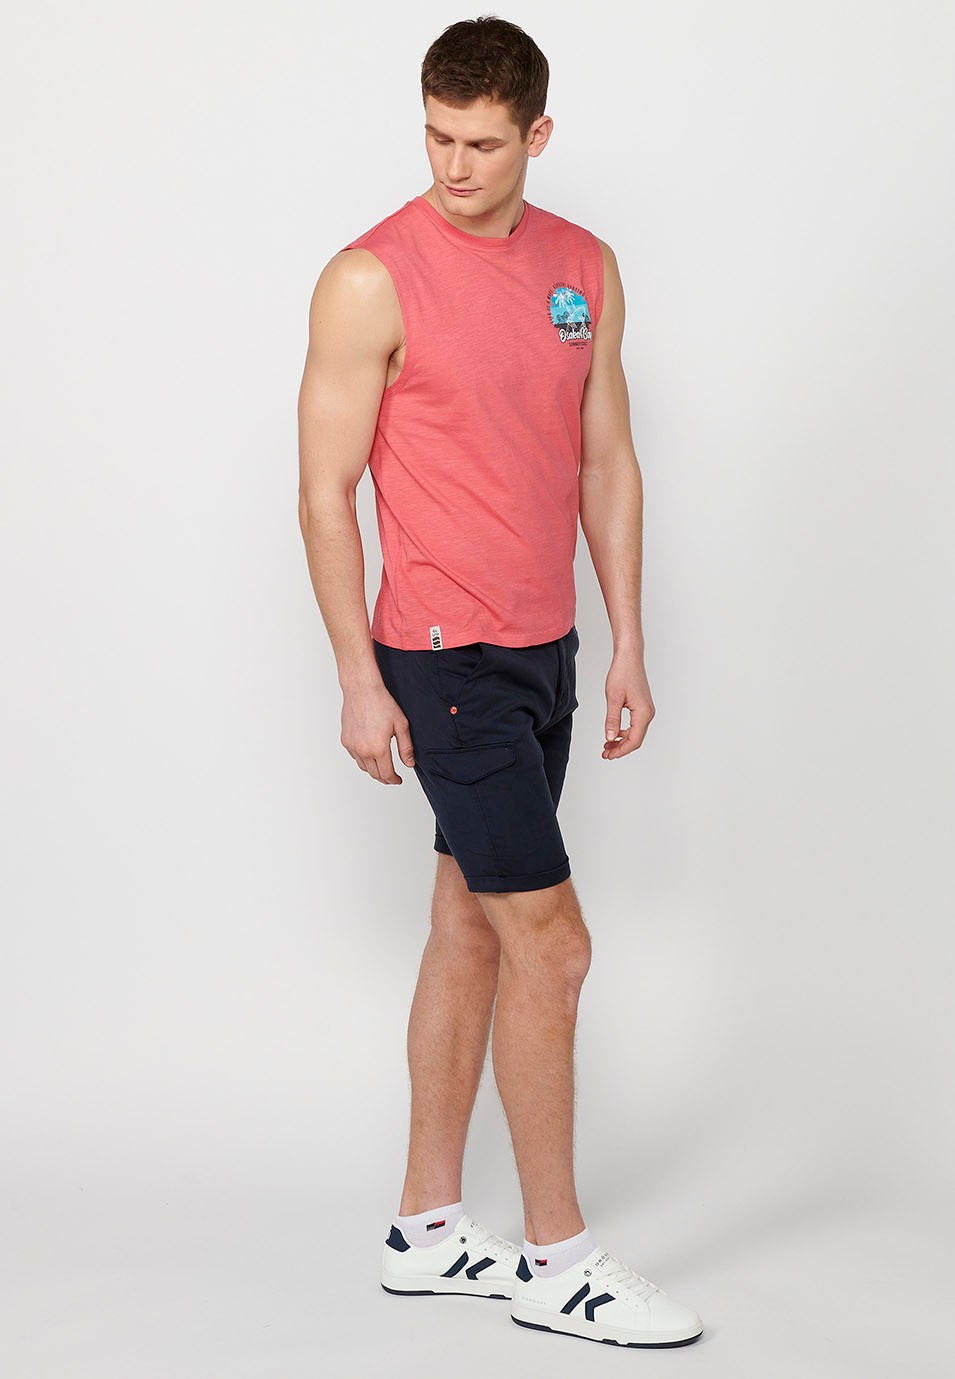 Coral printed sleeveless tank top for men